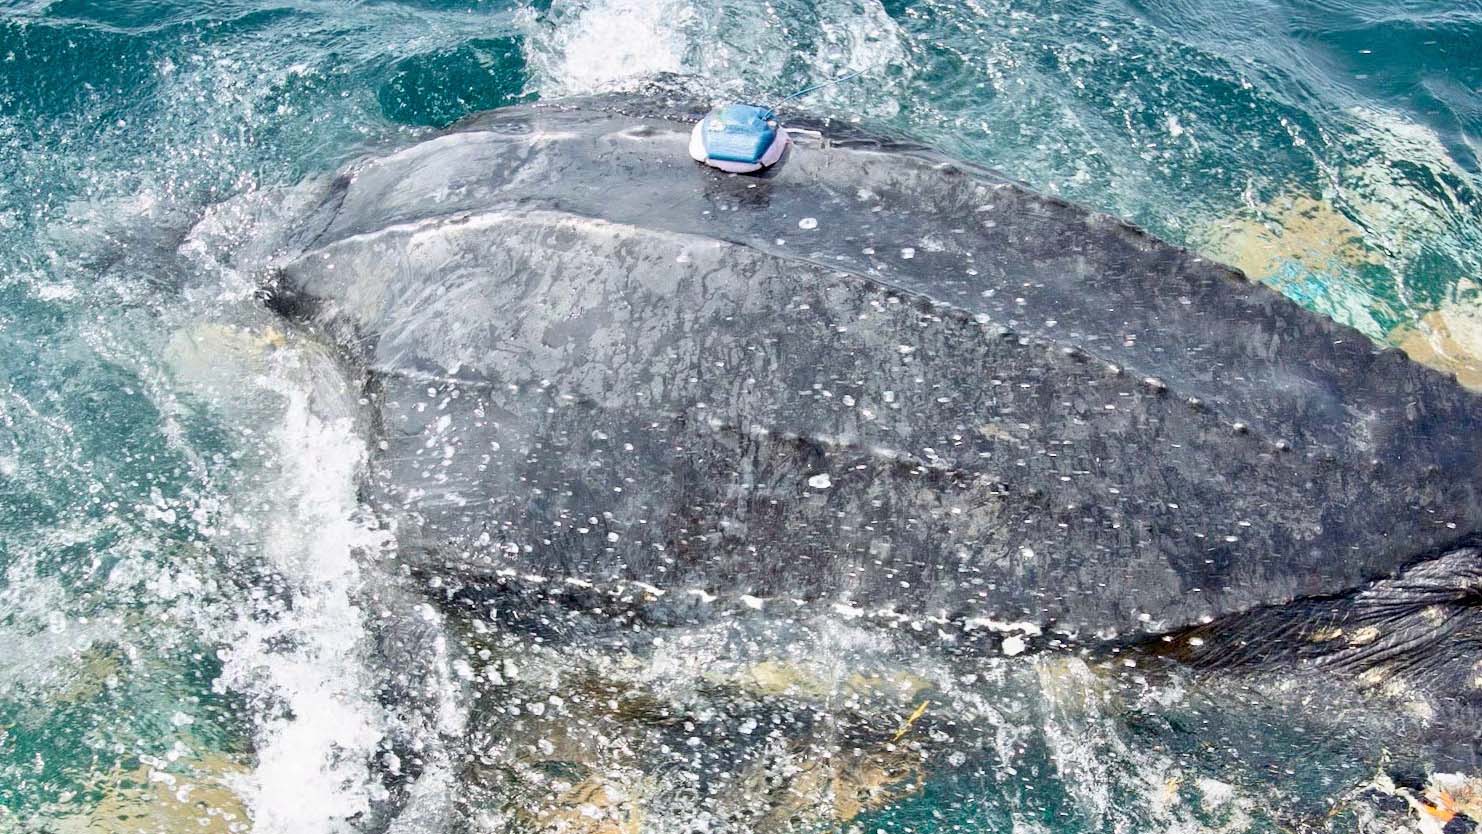 Ruby, a leatherback sea turtle, splashes in the water after researchers attached a satellite tag to her.